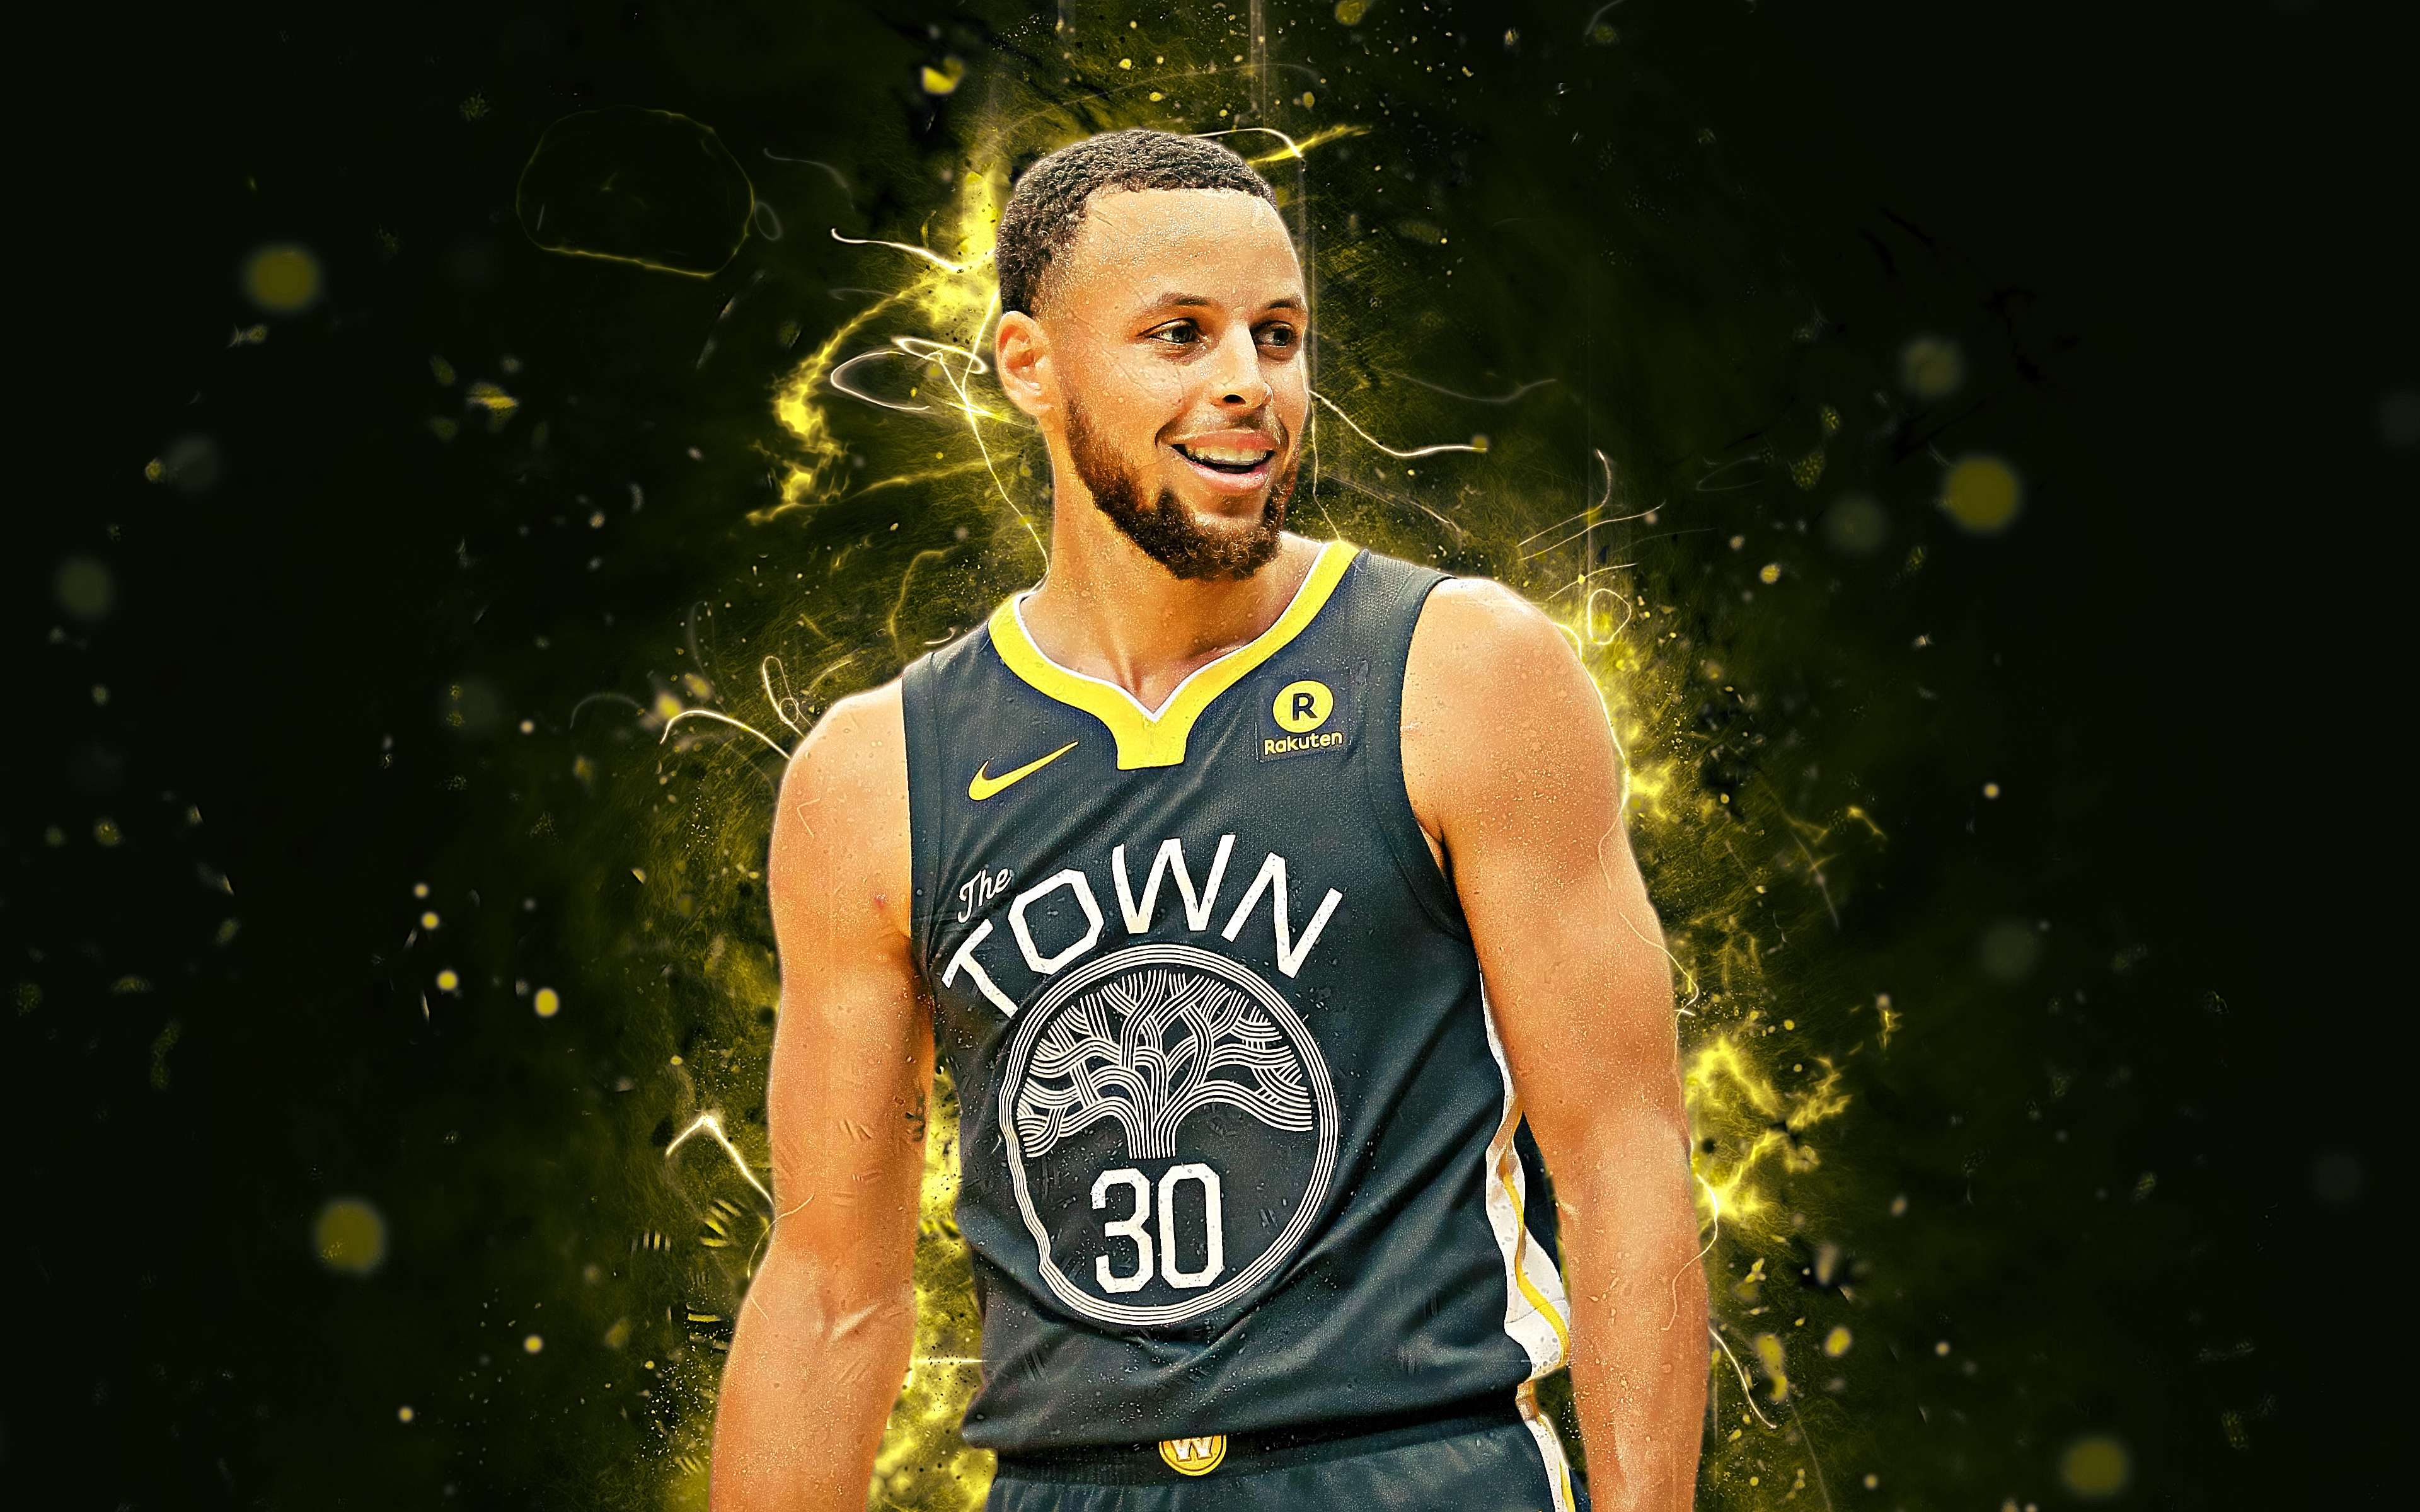 Basketball Steph Curry Wallpapers Wallpaper Cave